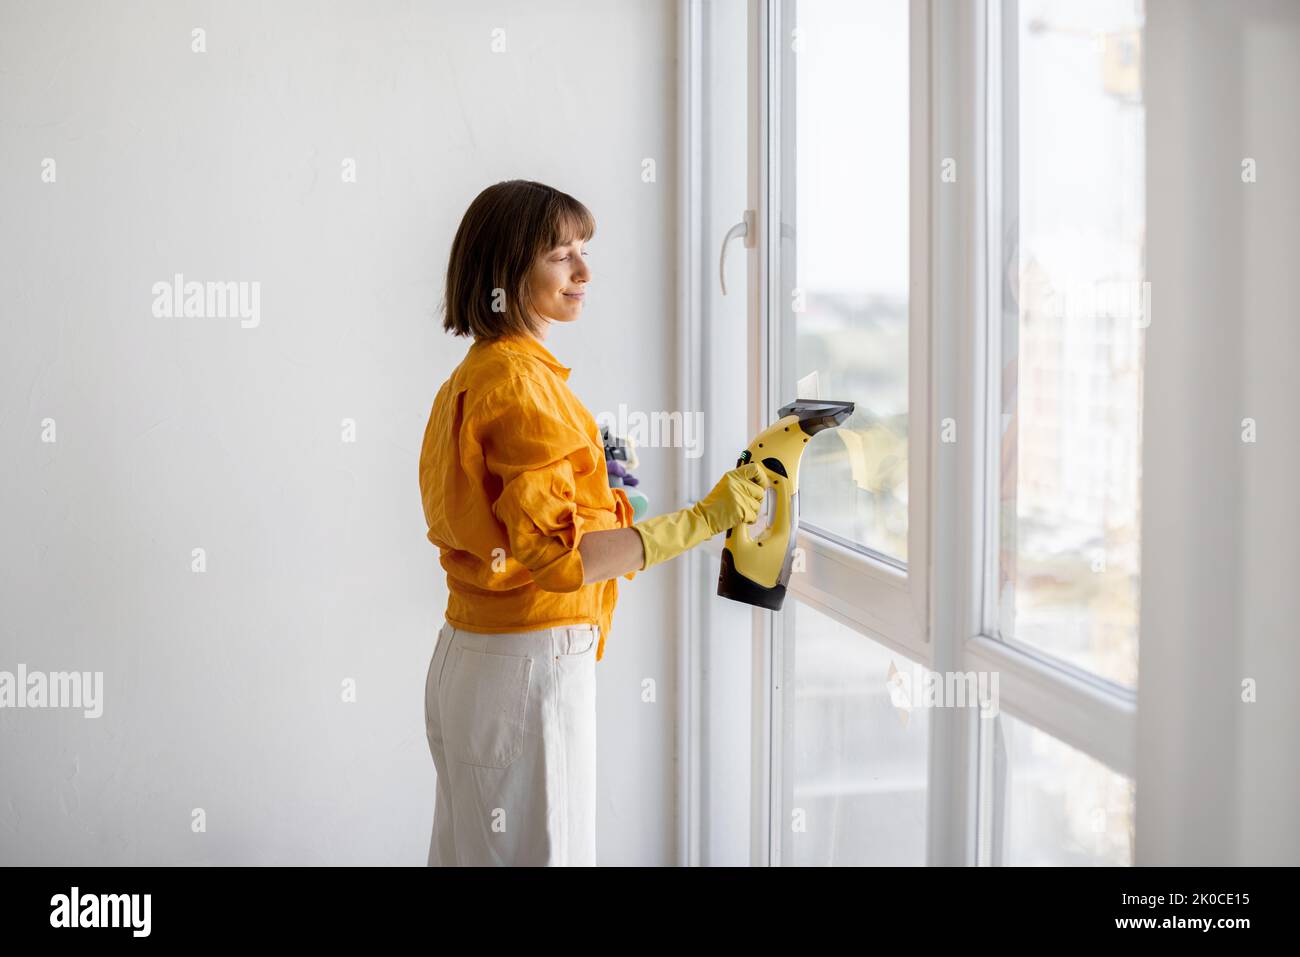 Young housewife or a cleaning company employee washes window with special tool in apartment. Stock Photo